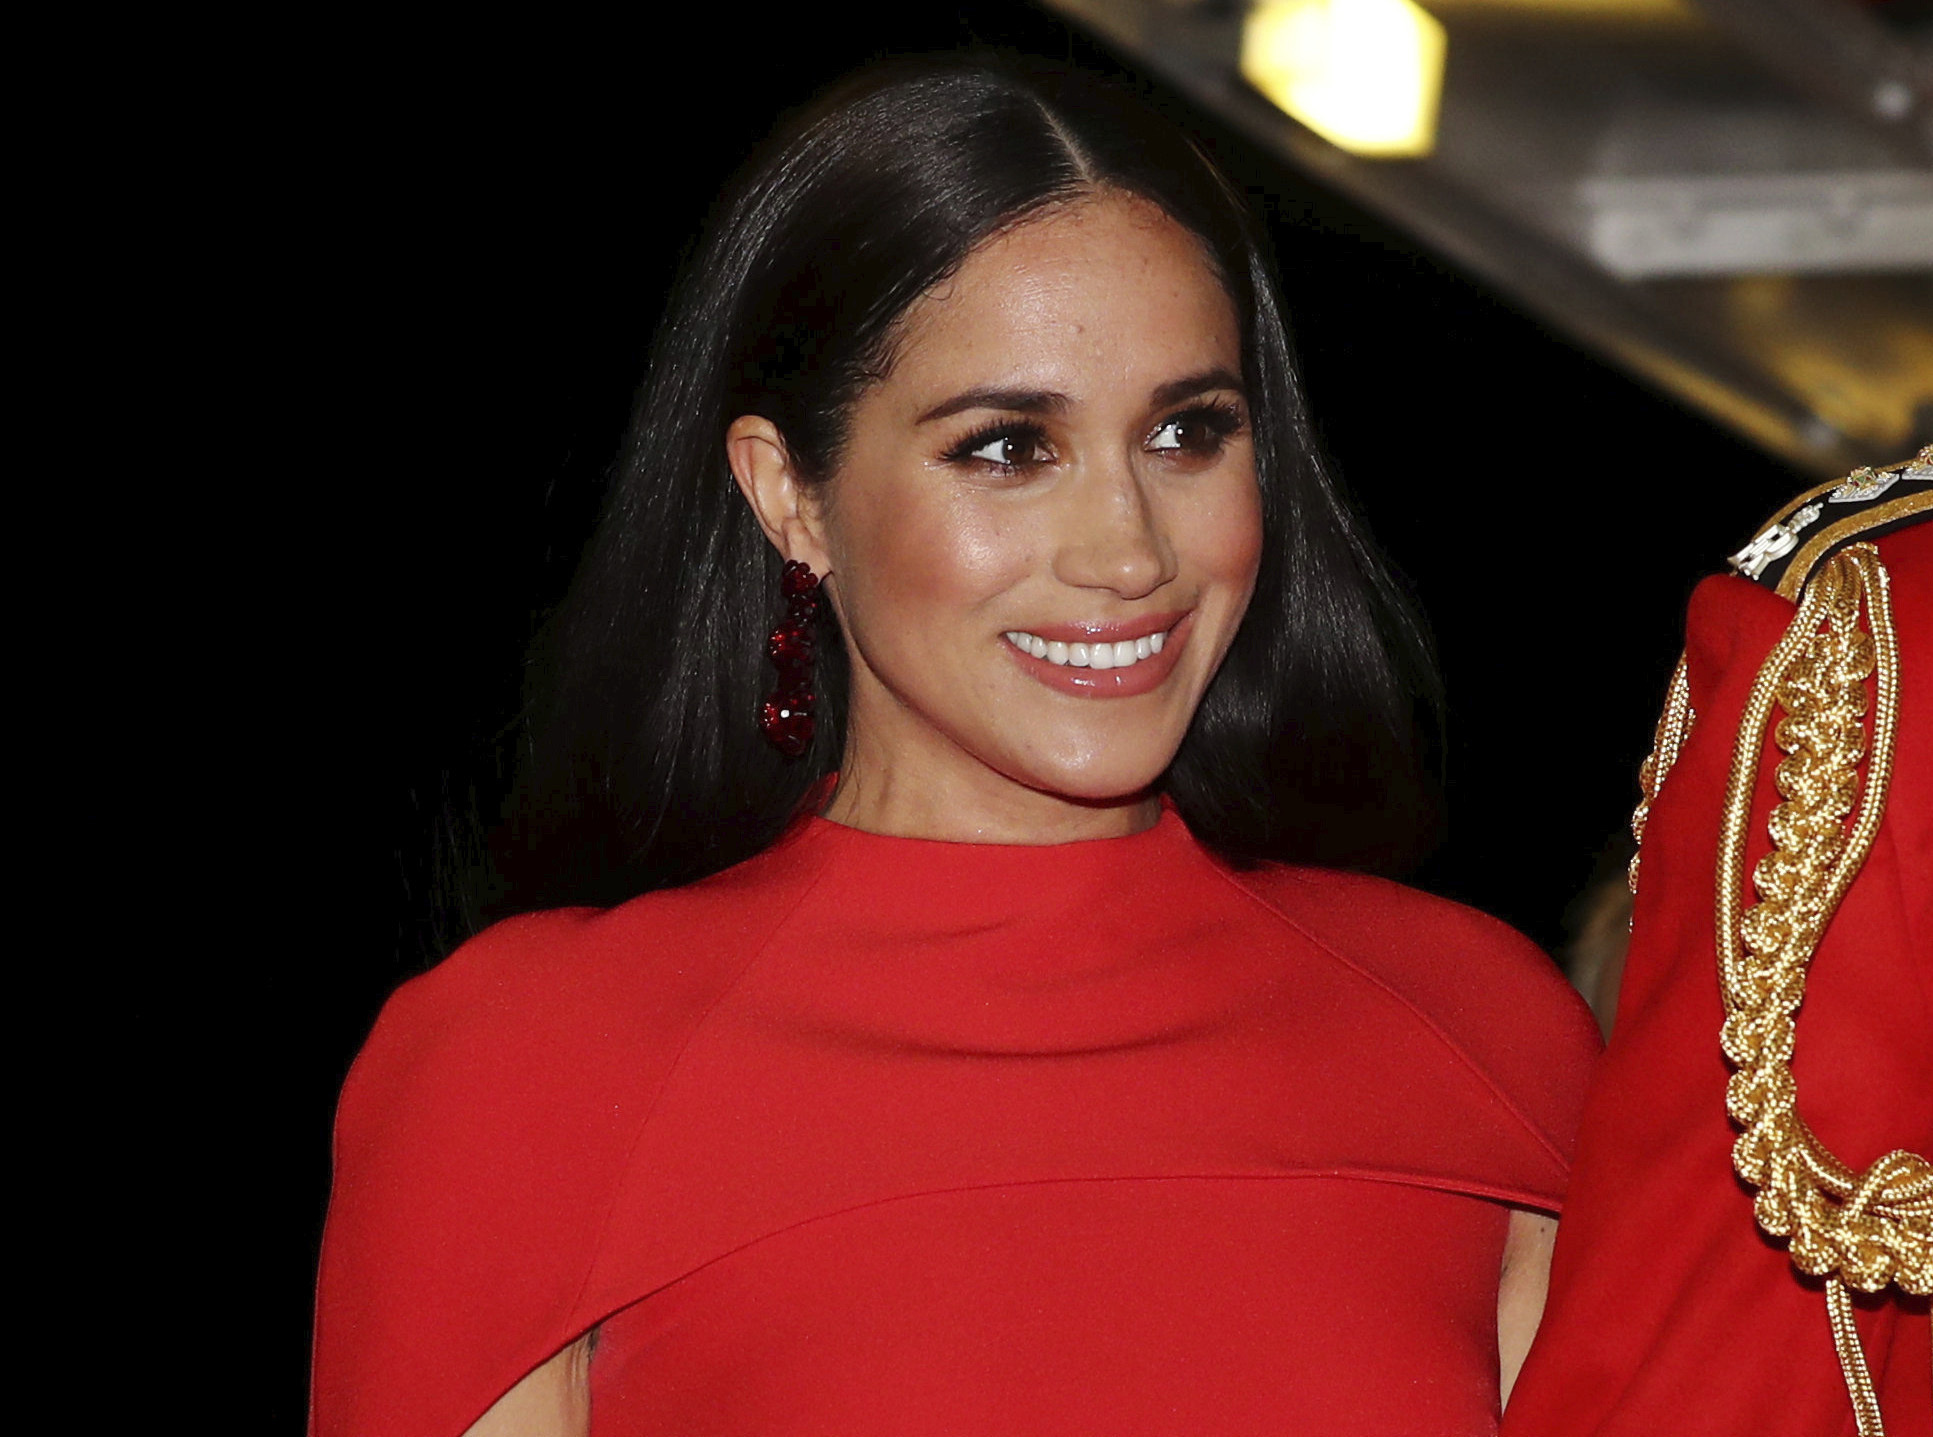 FILE - In this Saturday March 7, 2020 file photo, Meghan, Duchess of Sussex with Prince Harry arrives at the Royal Albert Hall in London, to attend the Mountbatten Festival of Music. Meghan, the Duchess of Sussex, on Wednesday May 5, 2021, won her remaining copyright claim against a British tabloid publisher over the publication of a personal letter she wrote to her estranged father. (Simon Dawson/Pool via AP, File)